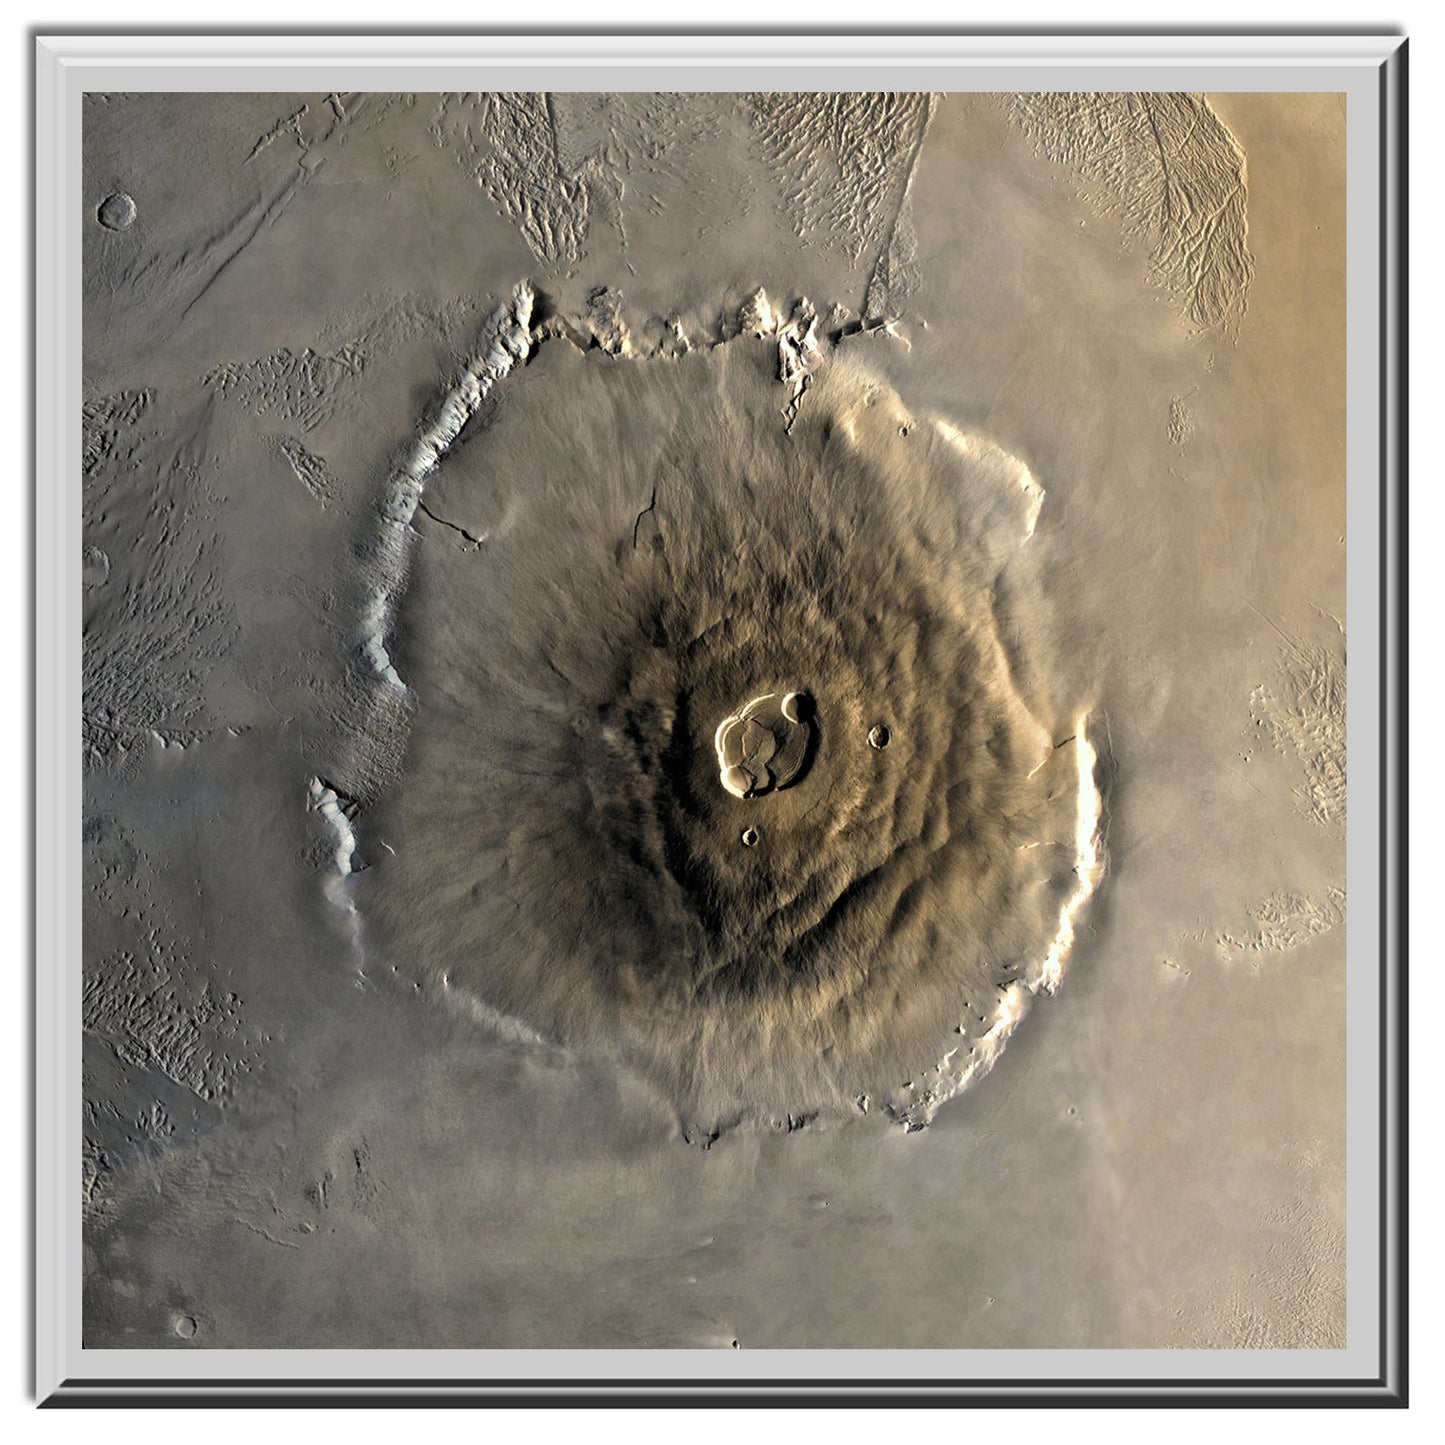 Largest Mountain of Mars - Olympus Mons